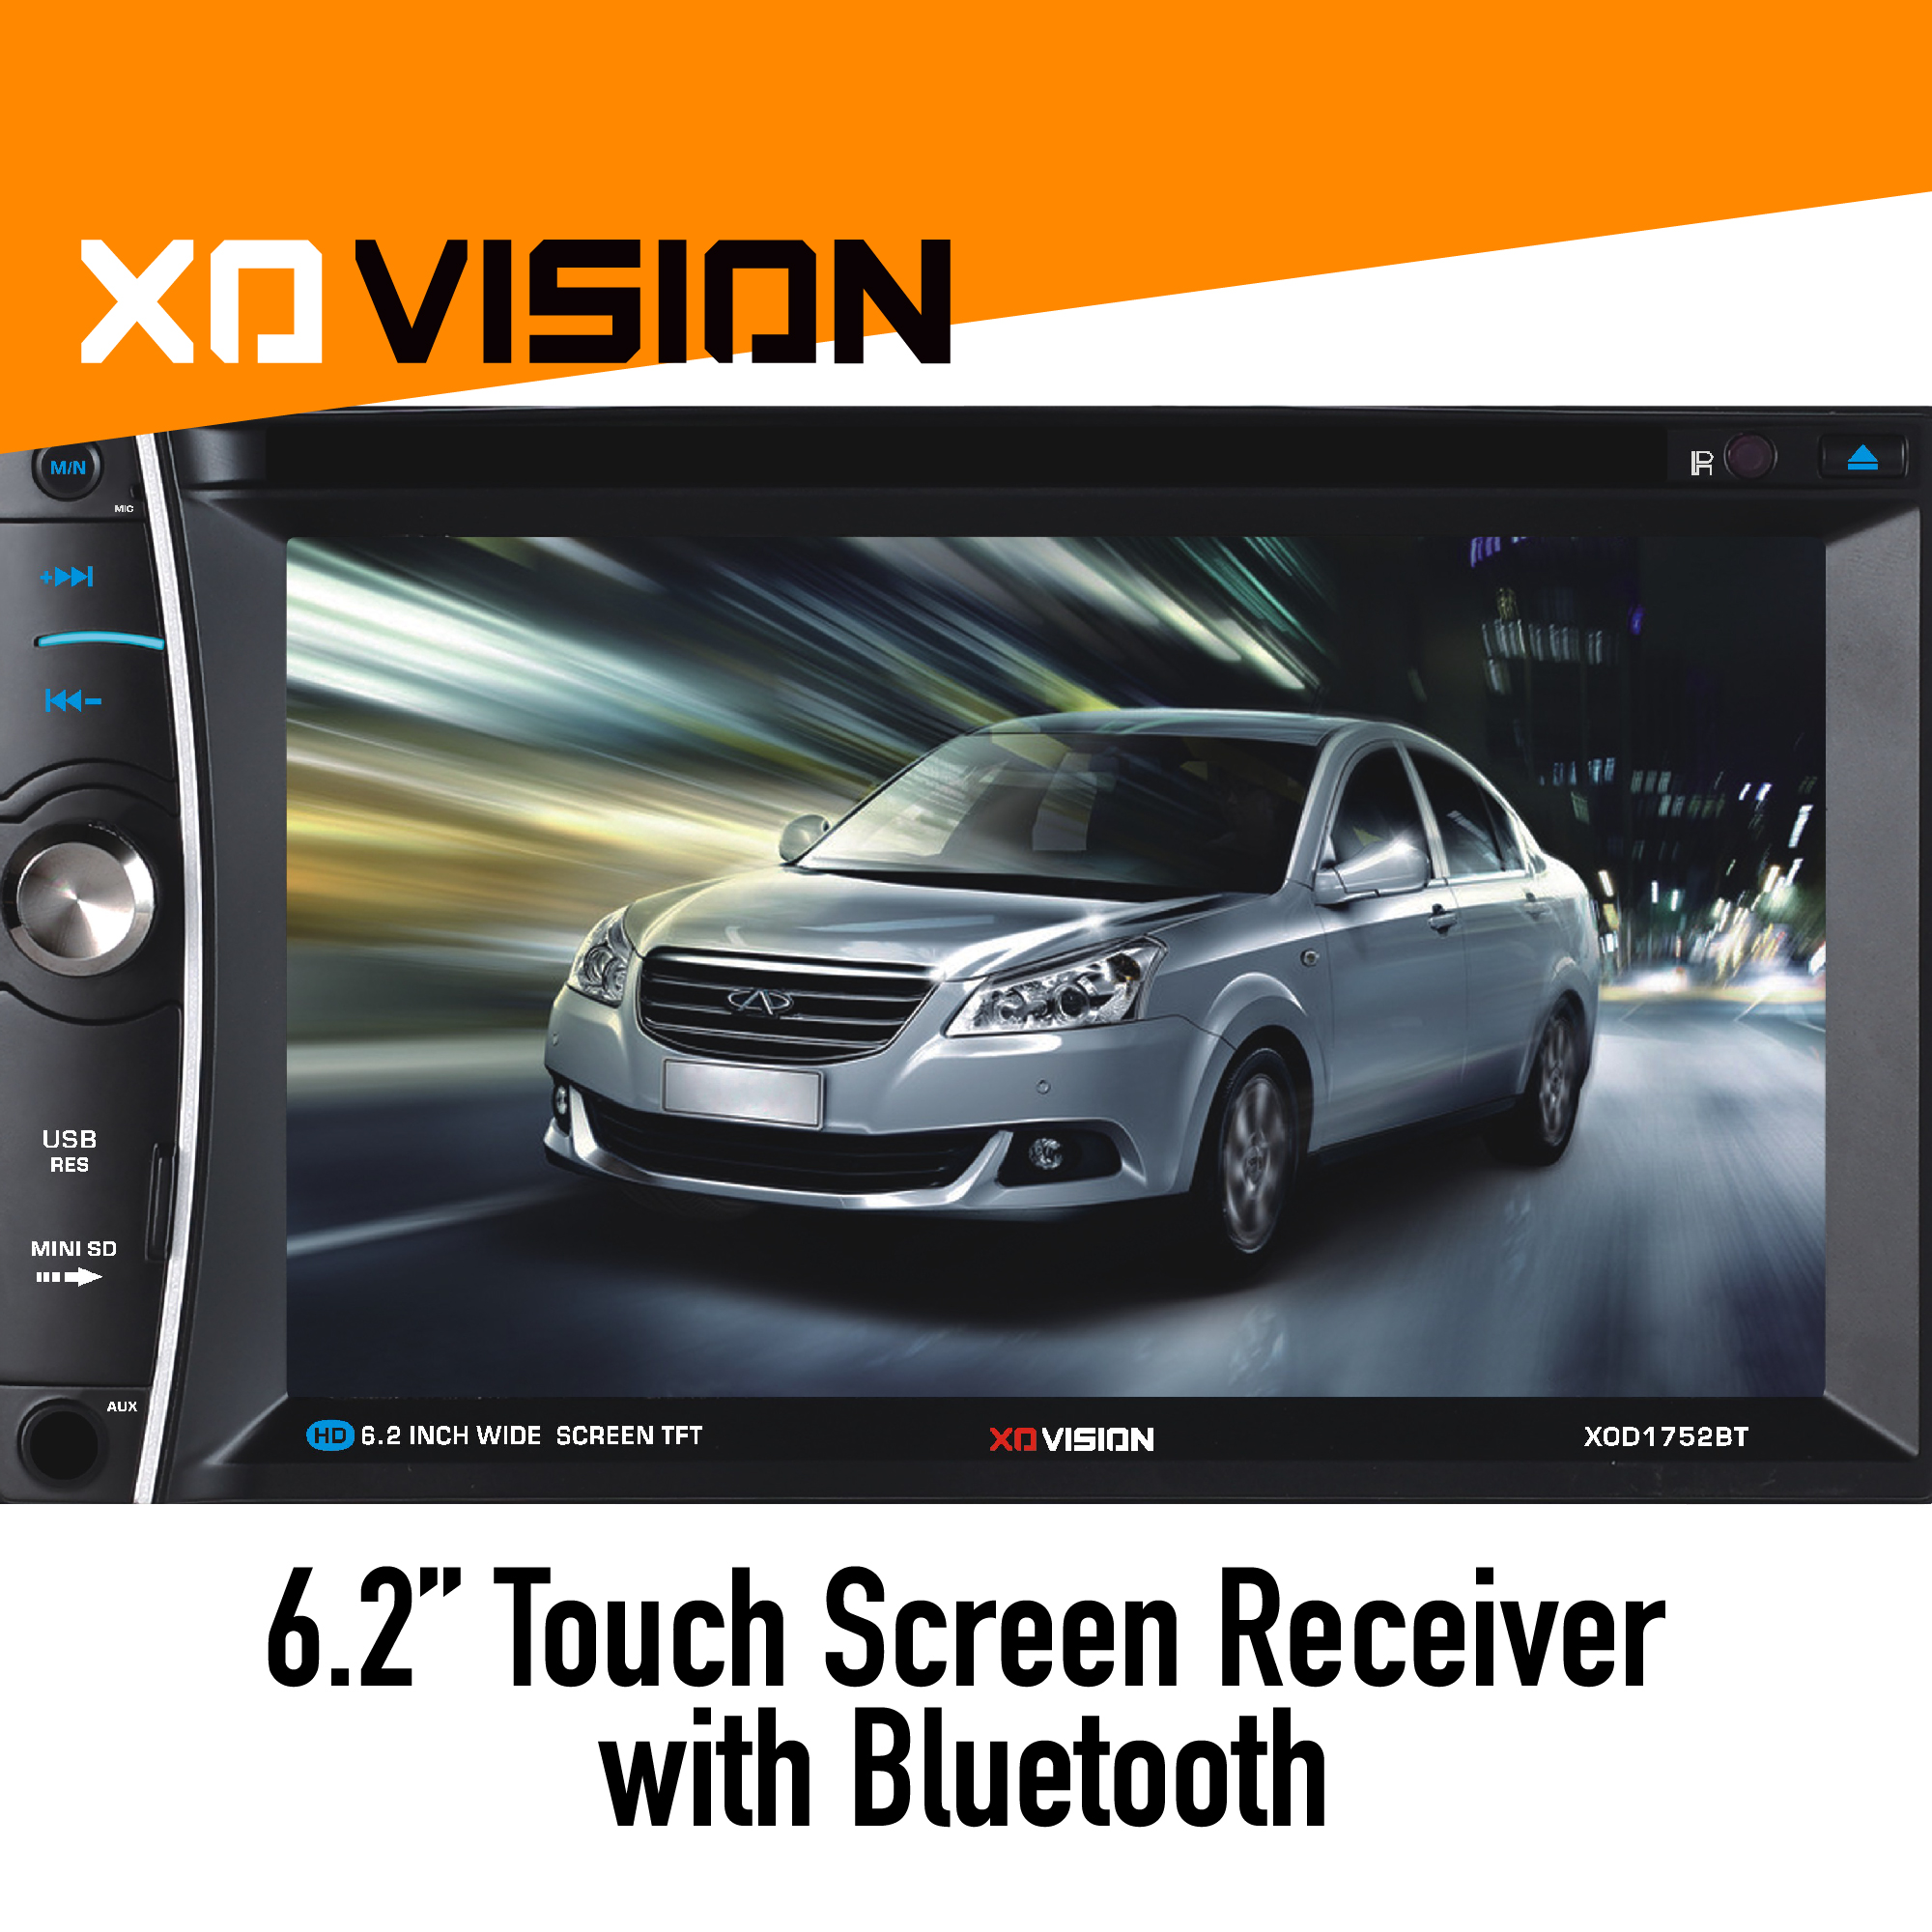 XO Vision XOD1752BT 6.2" Touch Screen In-Dash DVD Receiver - image 2 of 5